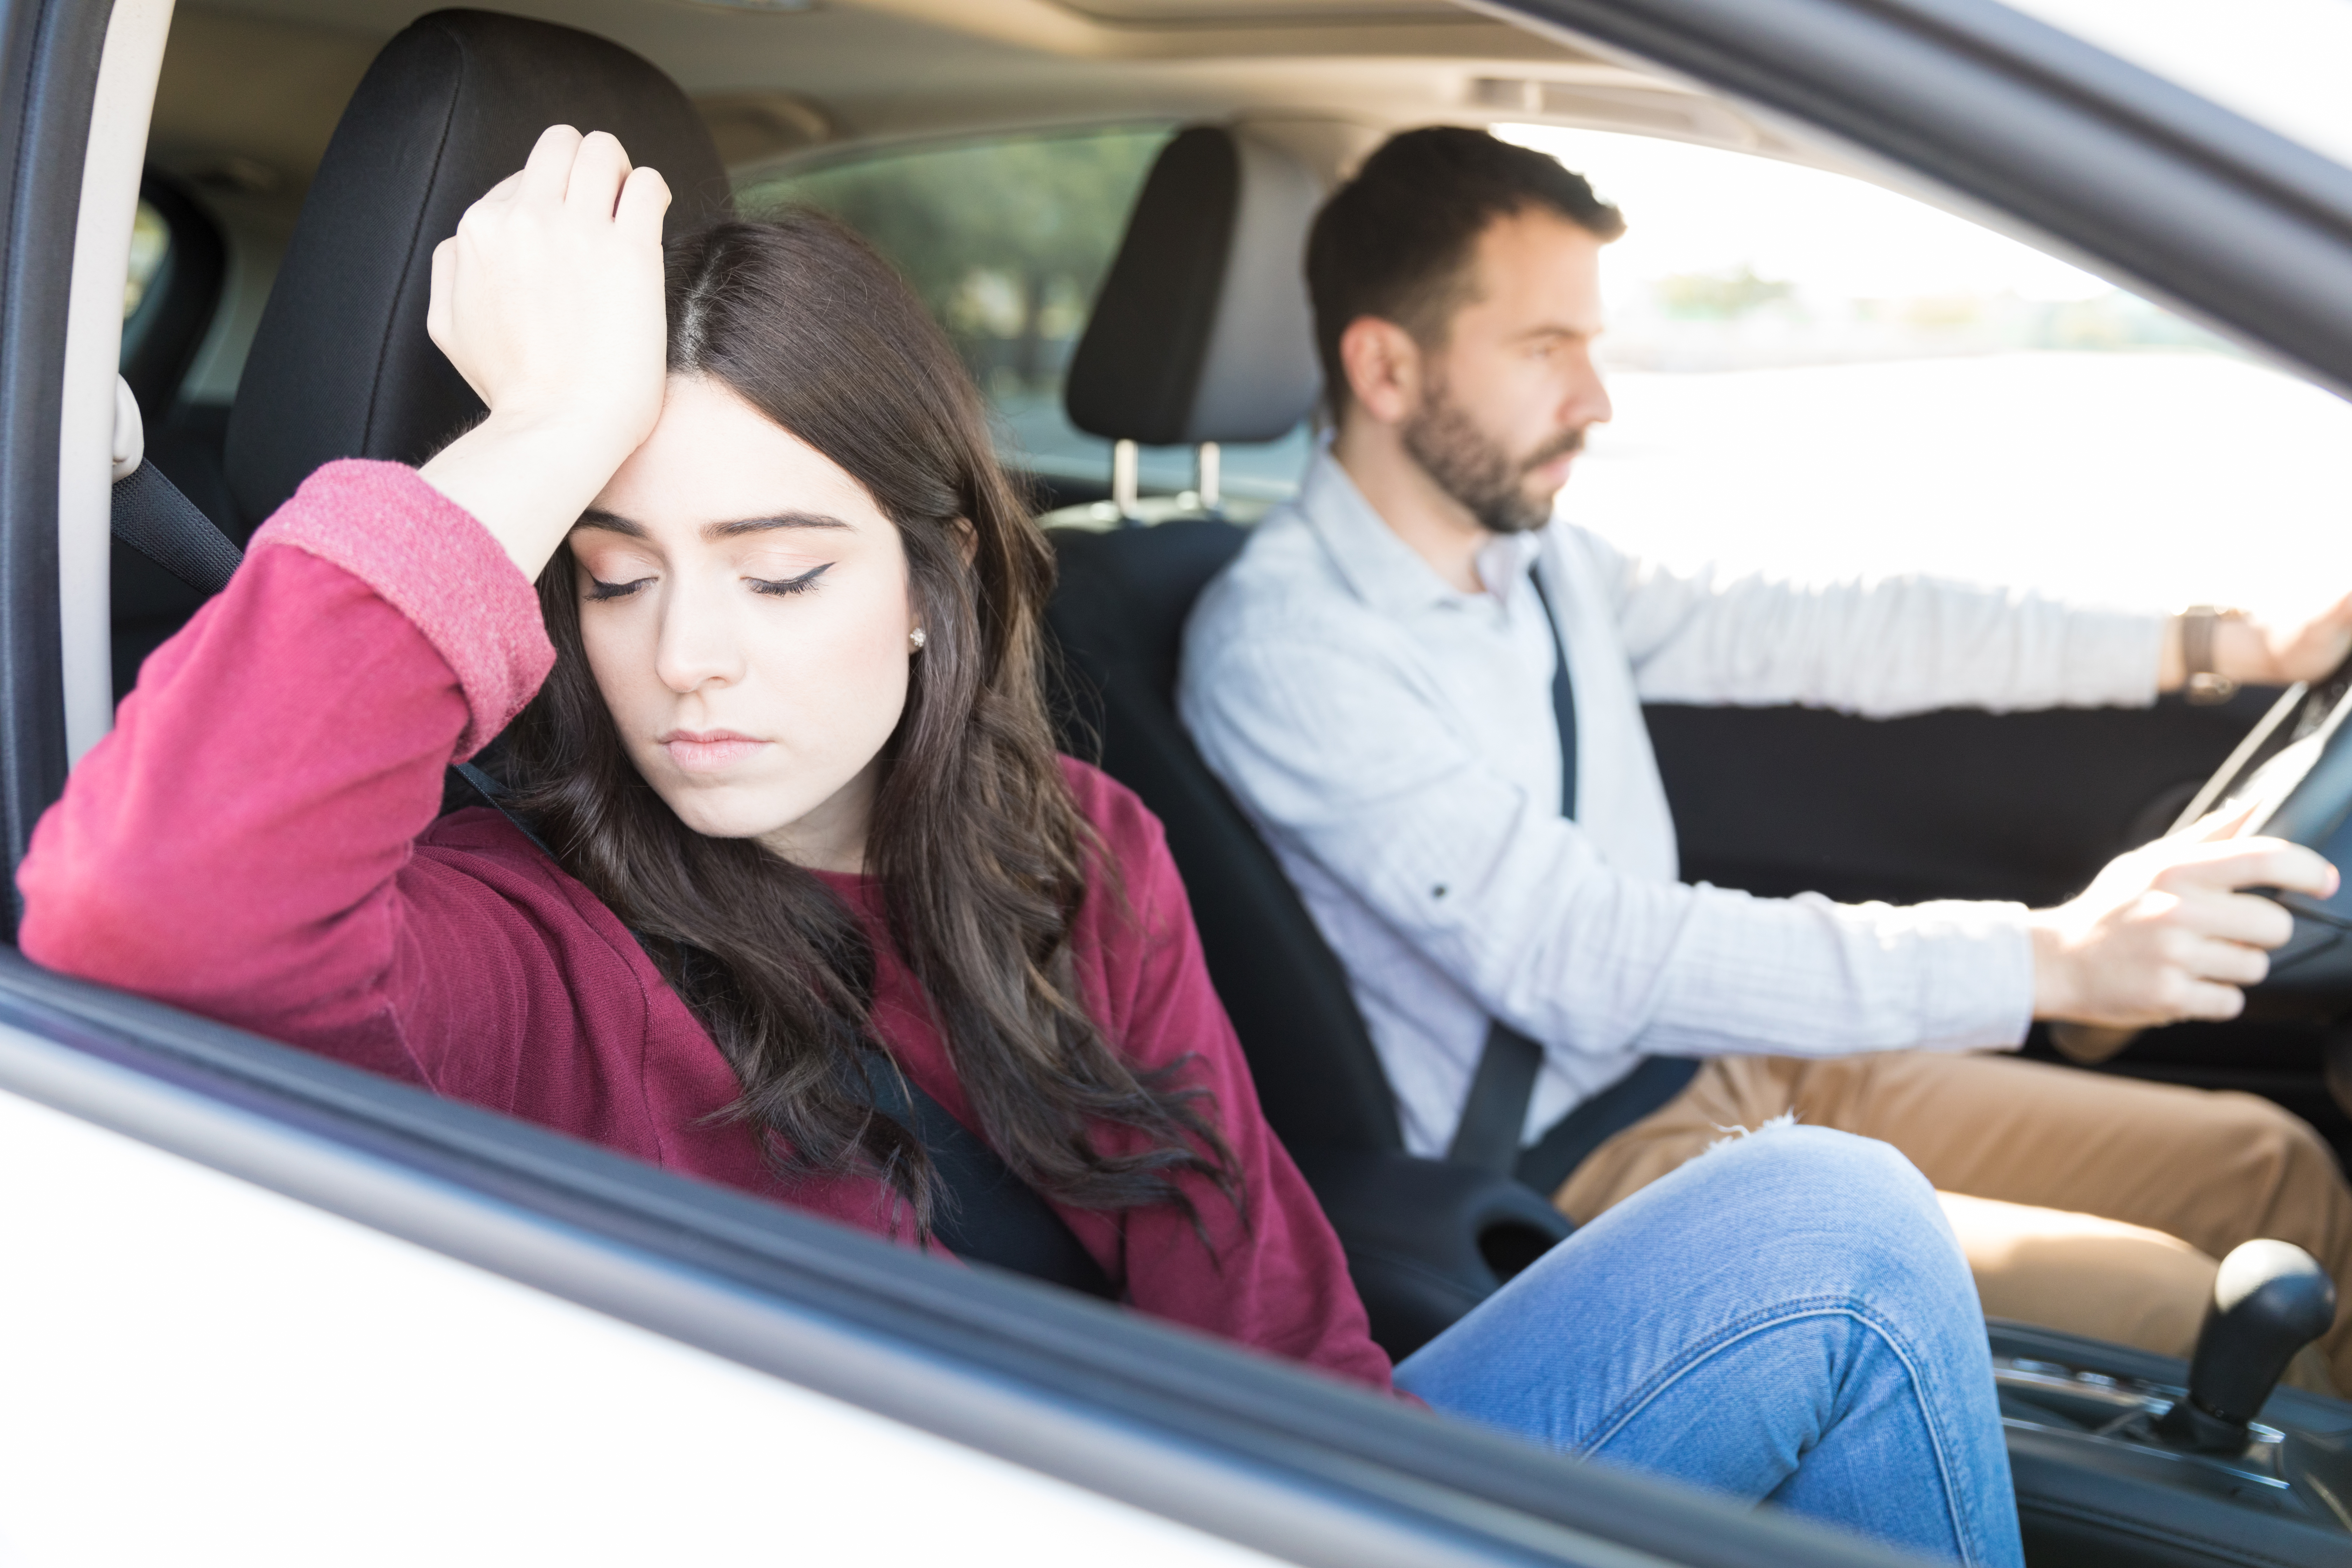 Sad attractive young woman sitting in car with boyfriend during drive | Source: Shutterstock.com